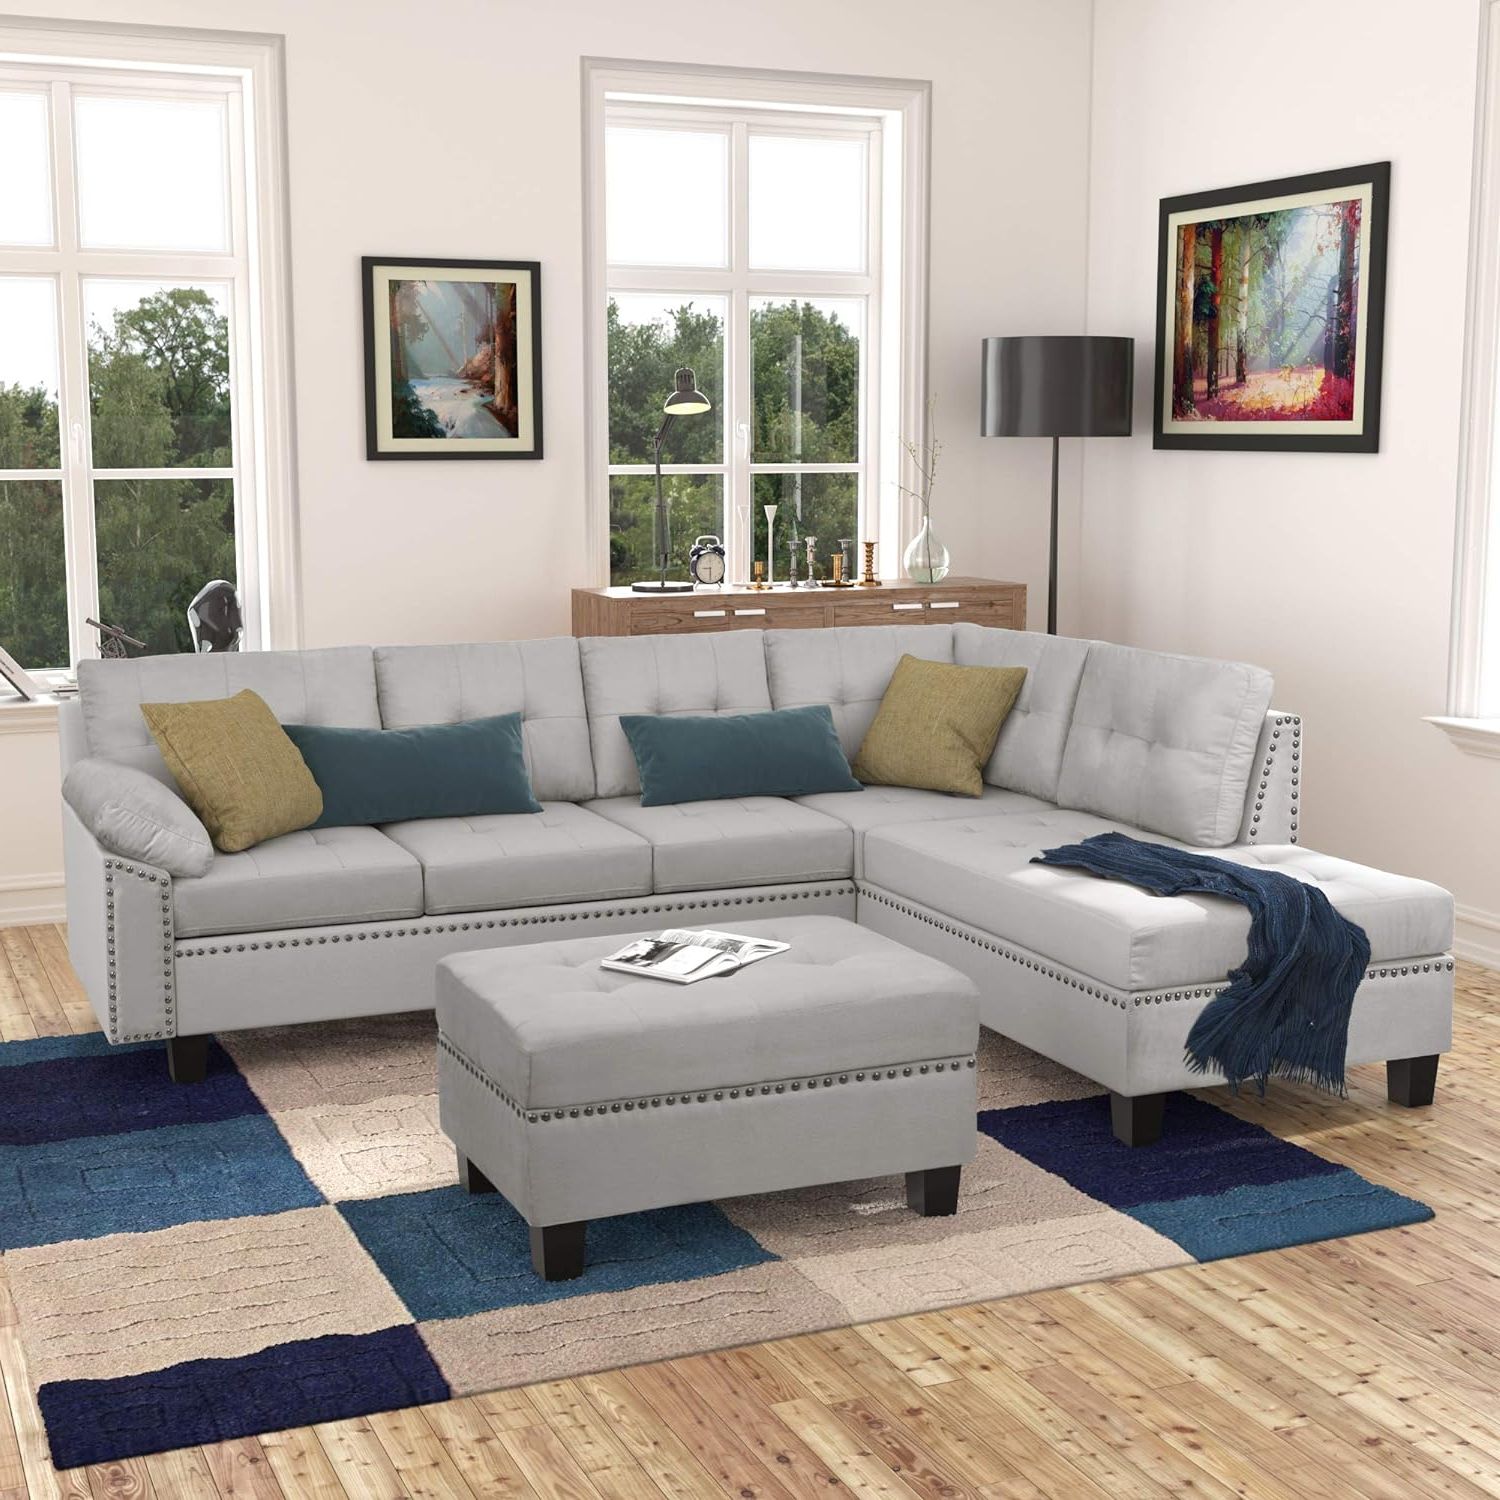 Favorite Amazon: Merax Sectional Sofa With Chaise Lounge And Ottoman 3 Seat Inside Sofas With Ottomans (View 11 of 15)